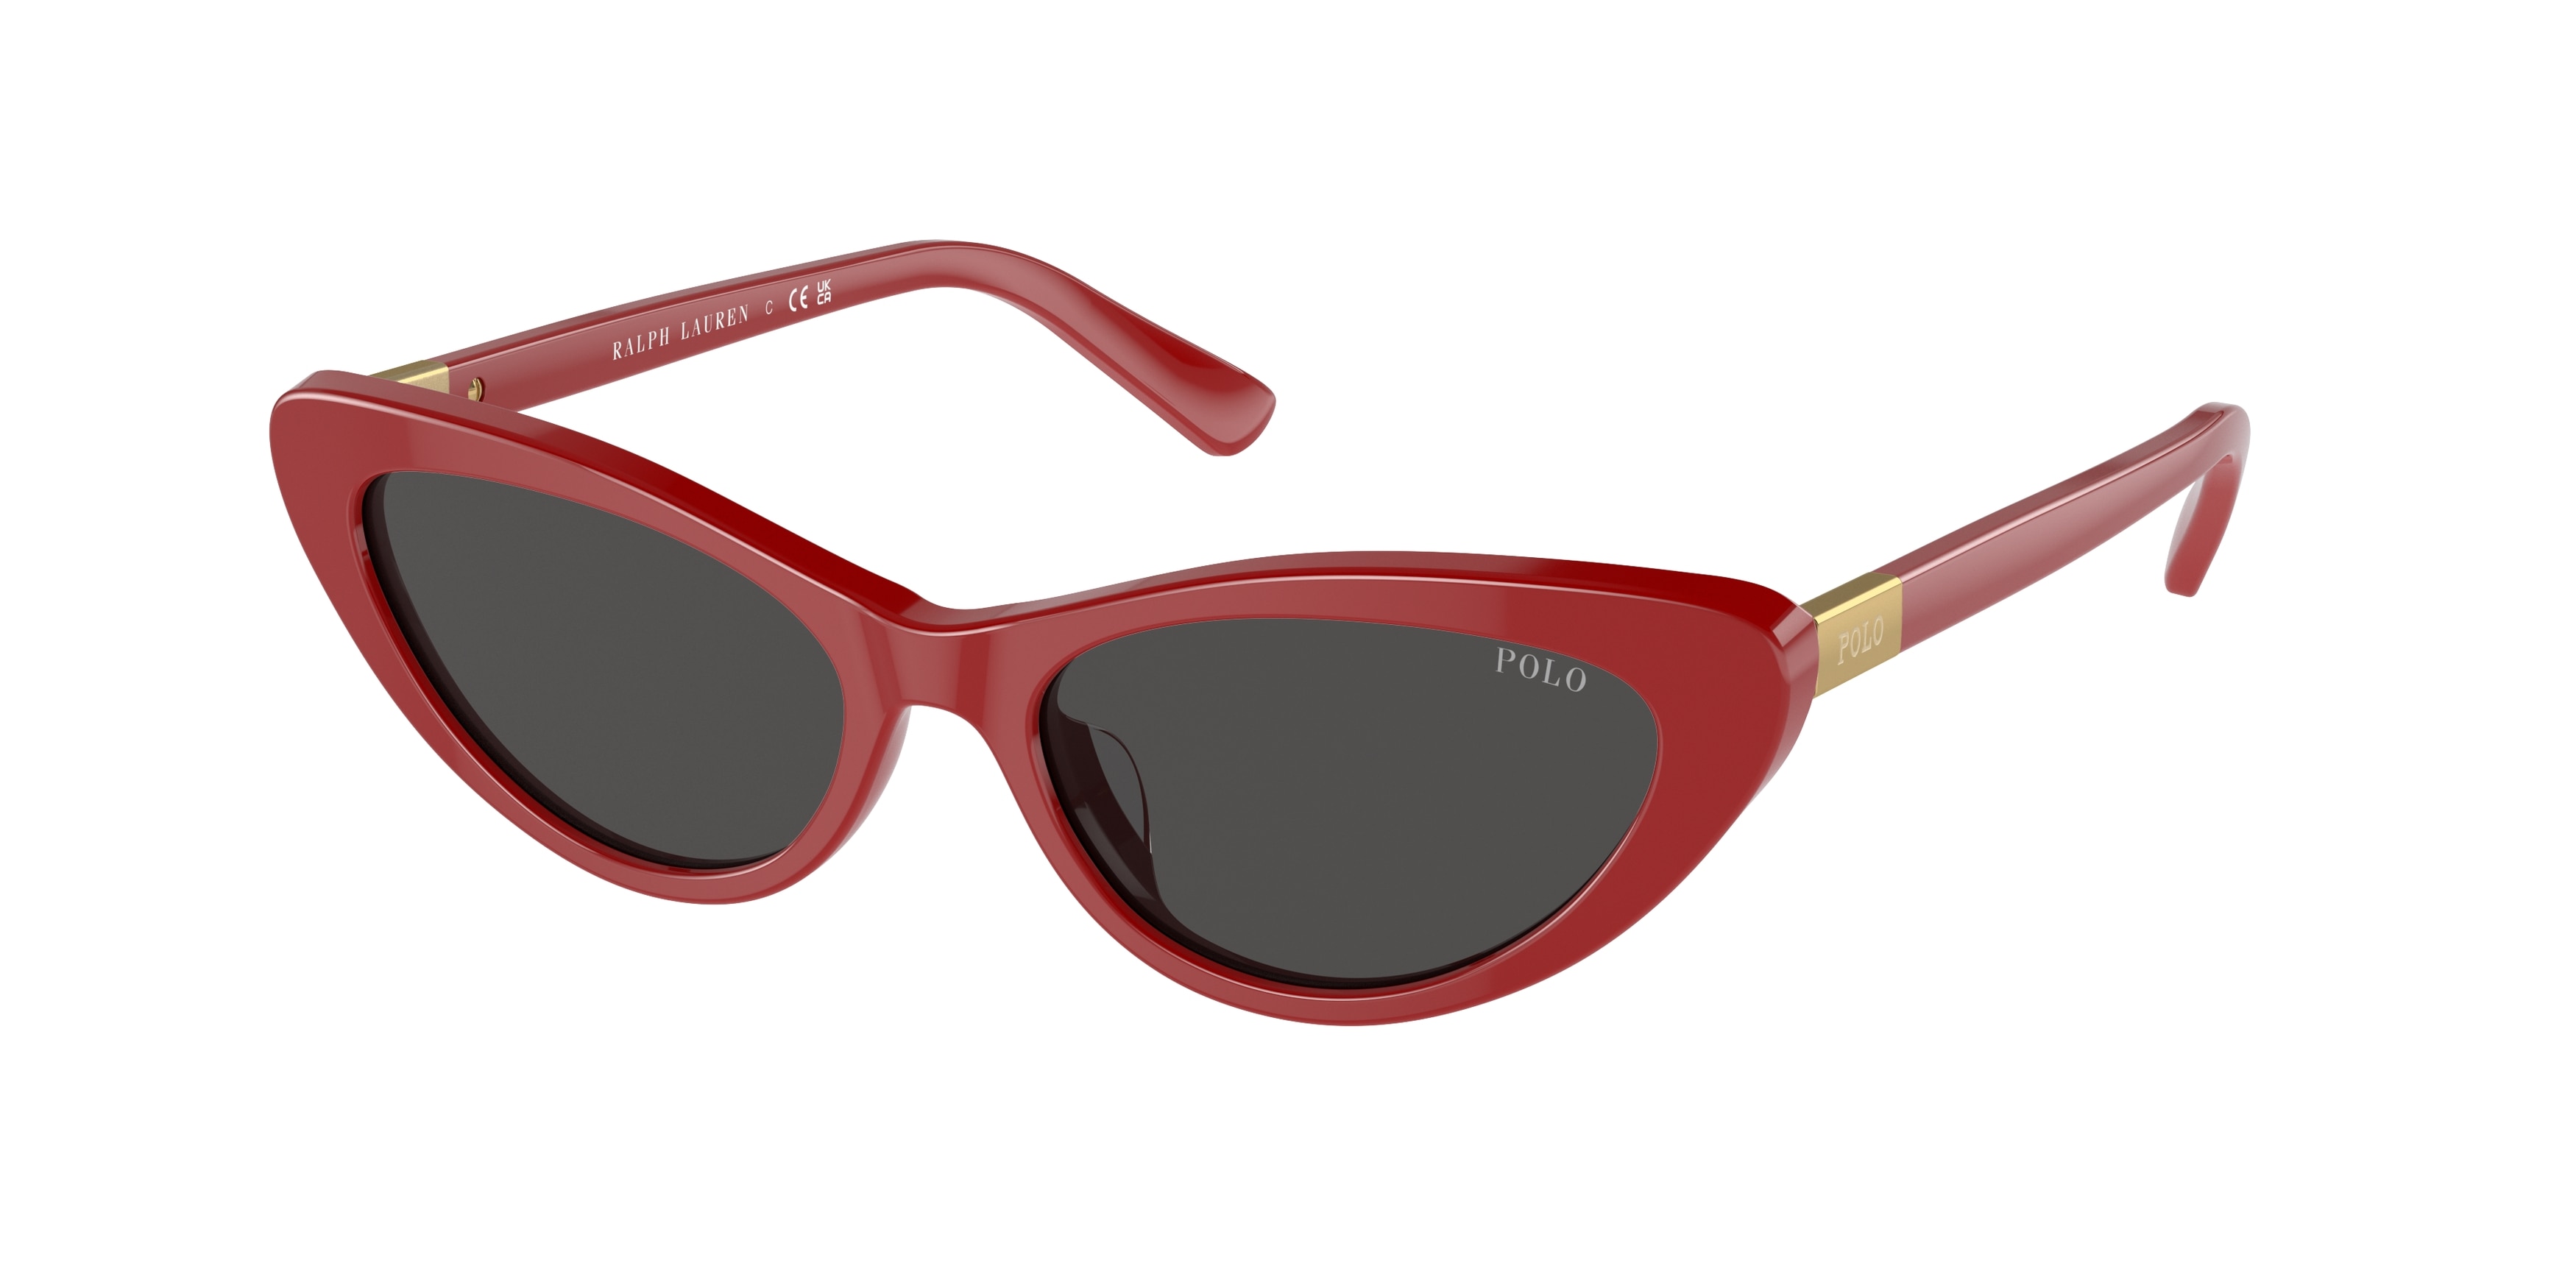 607787 - Shiny Classic Red